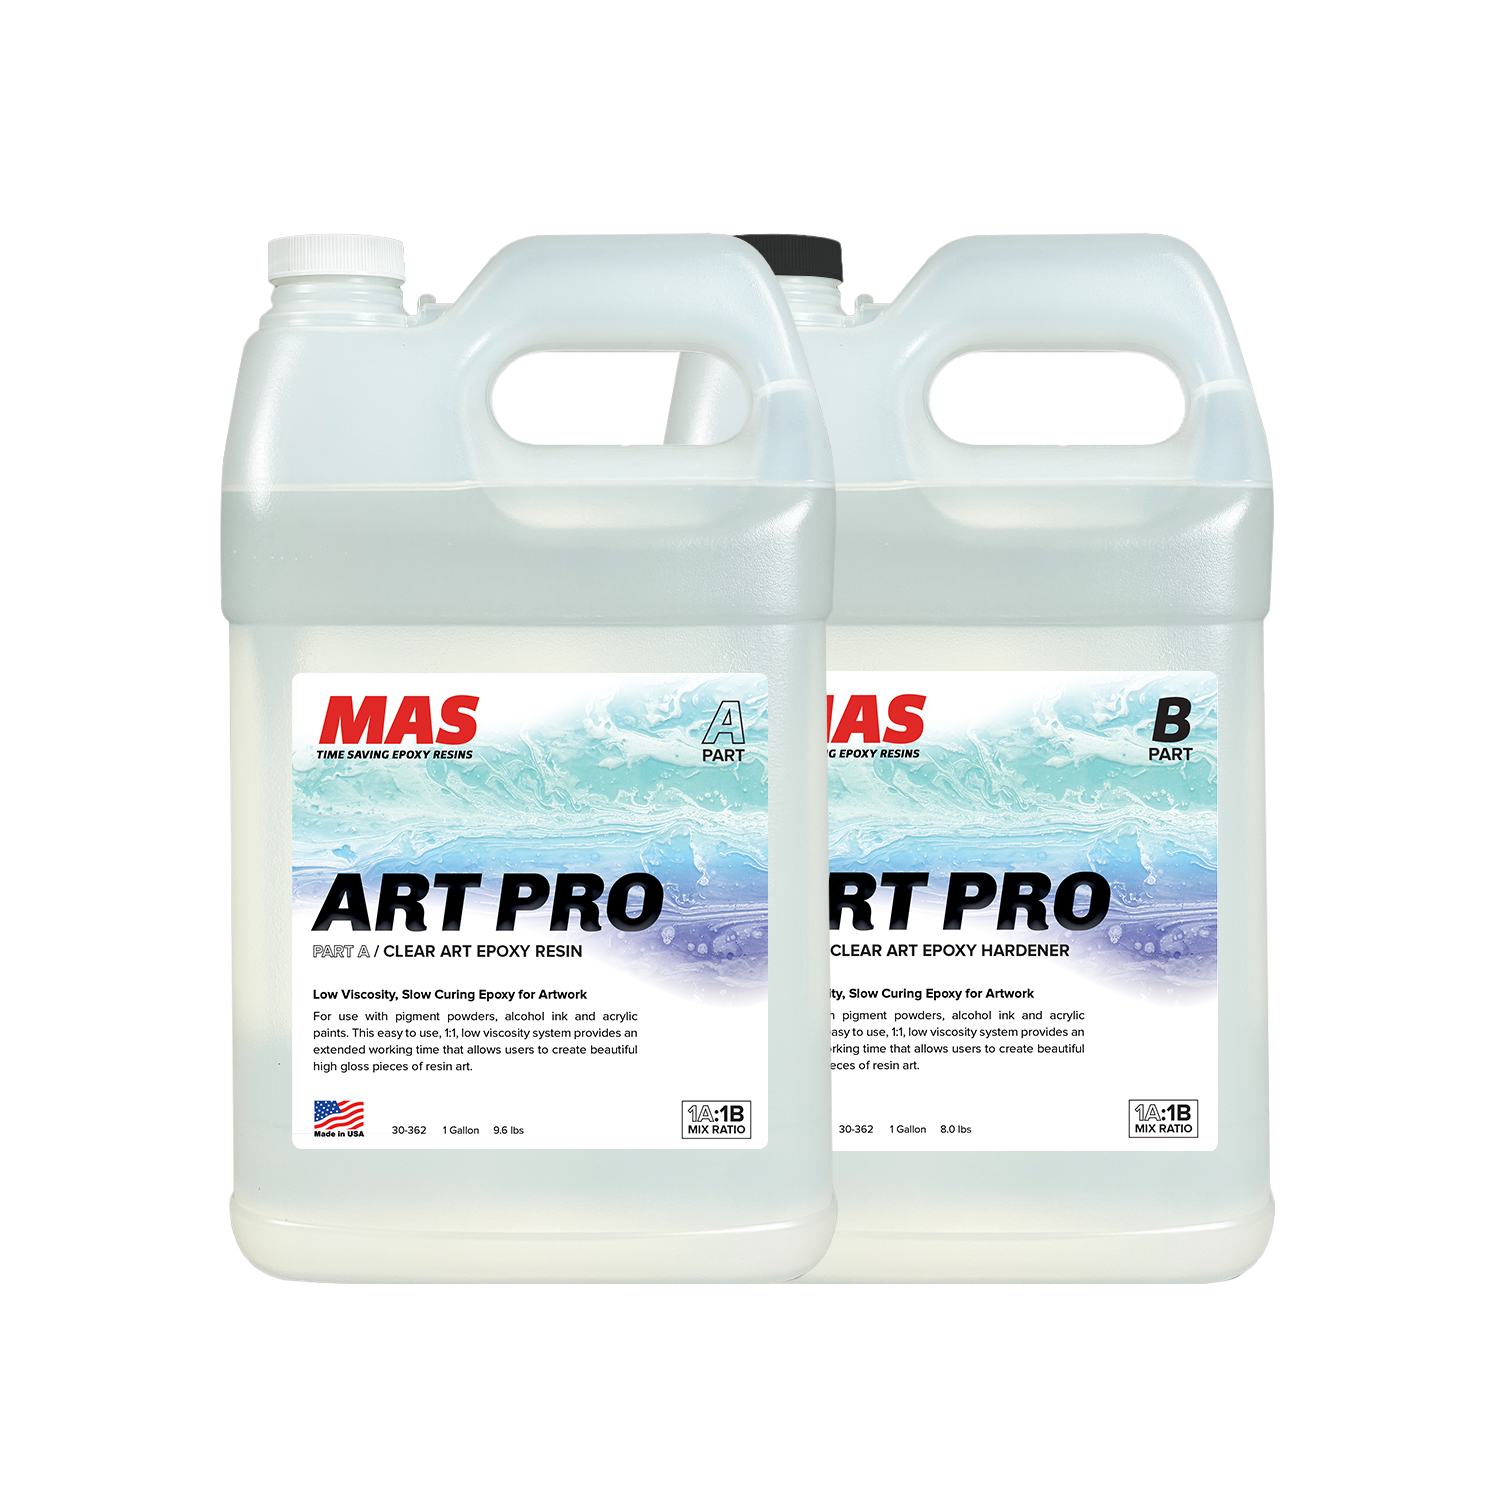 When ordering the art pro does the part a and part b come as a sold set or do we purchase it separately